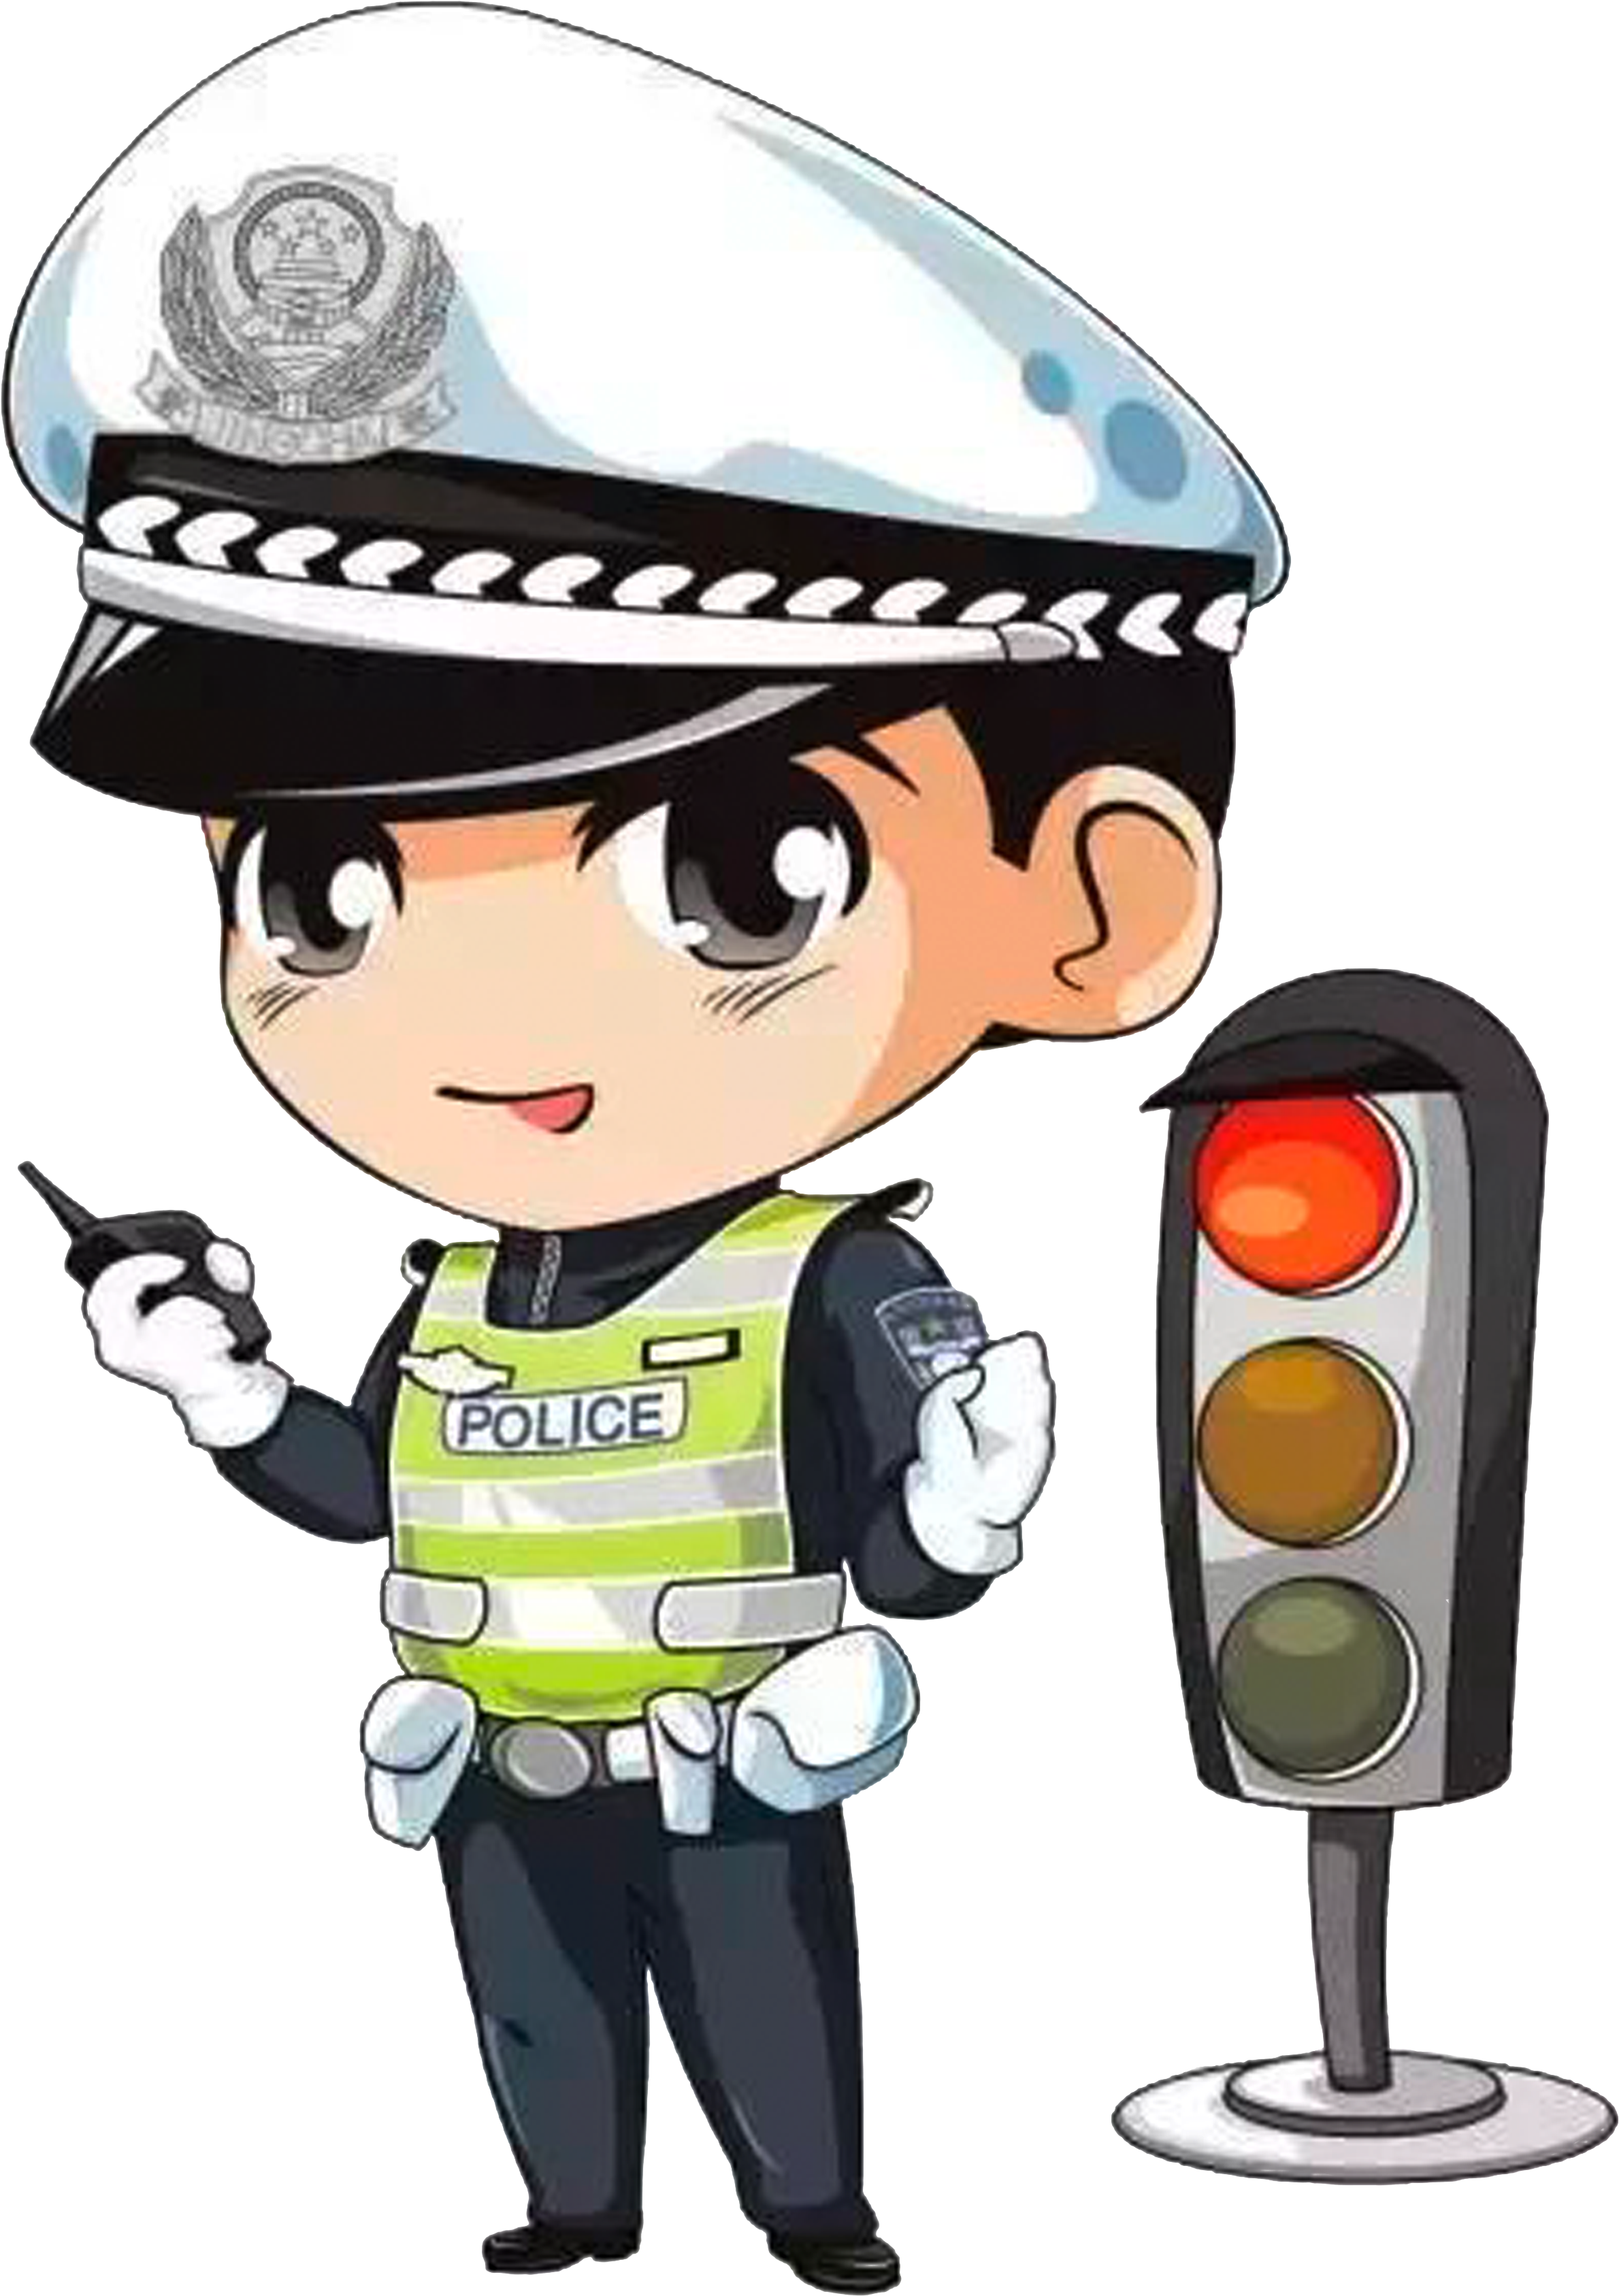 Police Officer Cartoon Traffic Police - Clipart Of Traffic Signal With Cop (5000x5000)